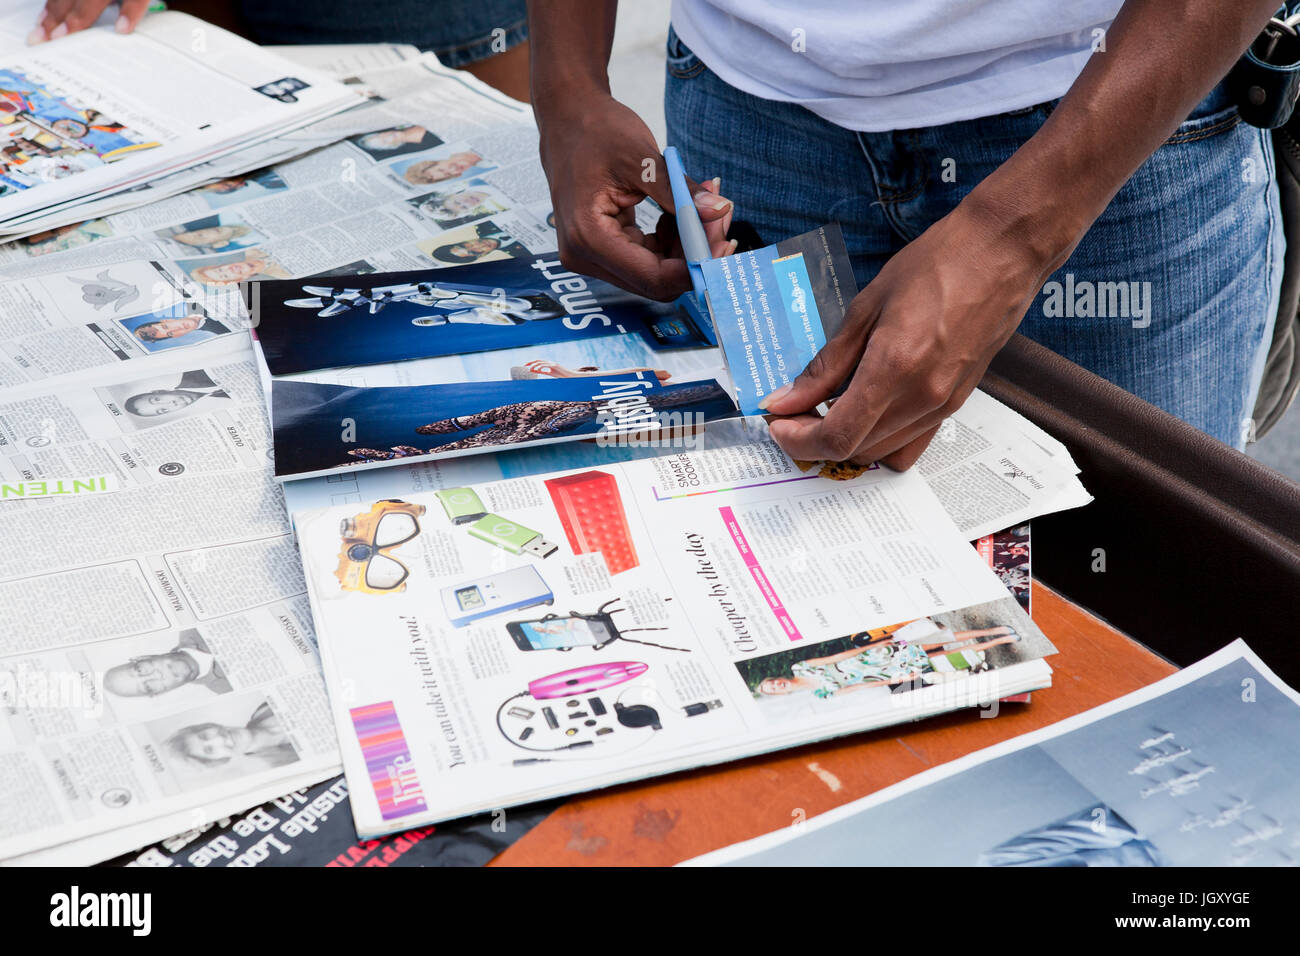 Black man clipping articles from a magazine using scissors - USA Stock Photo